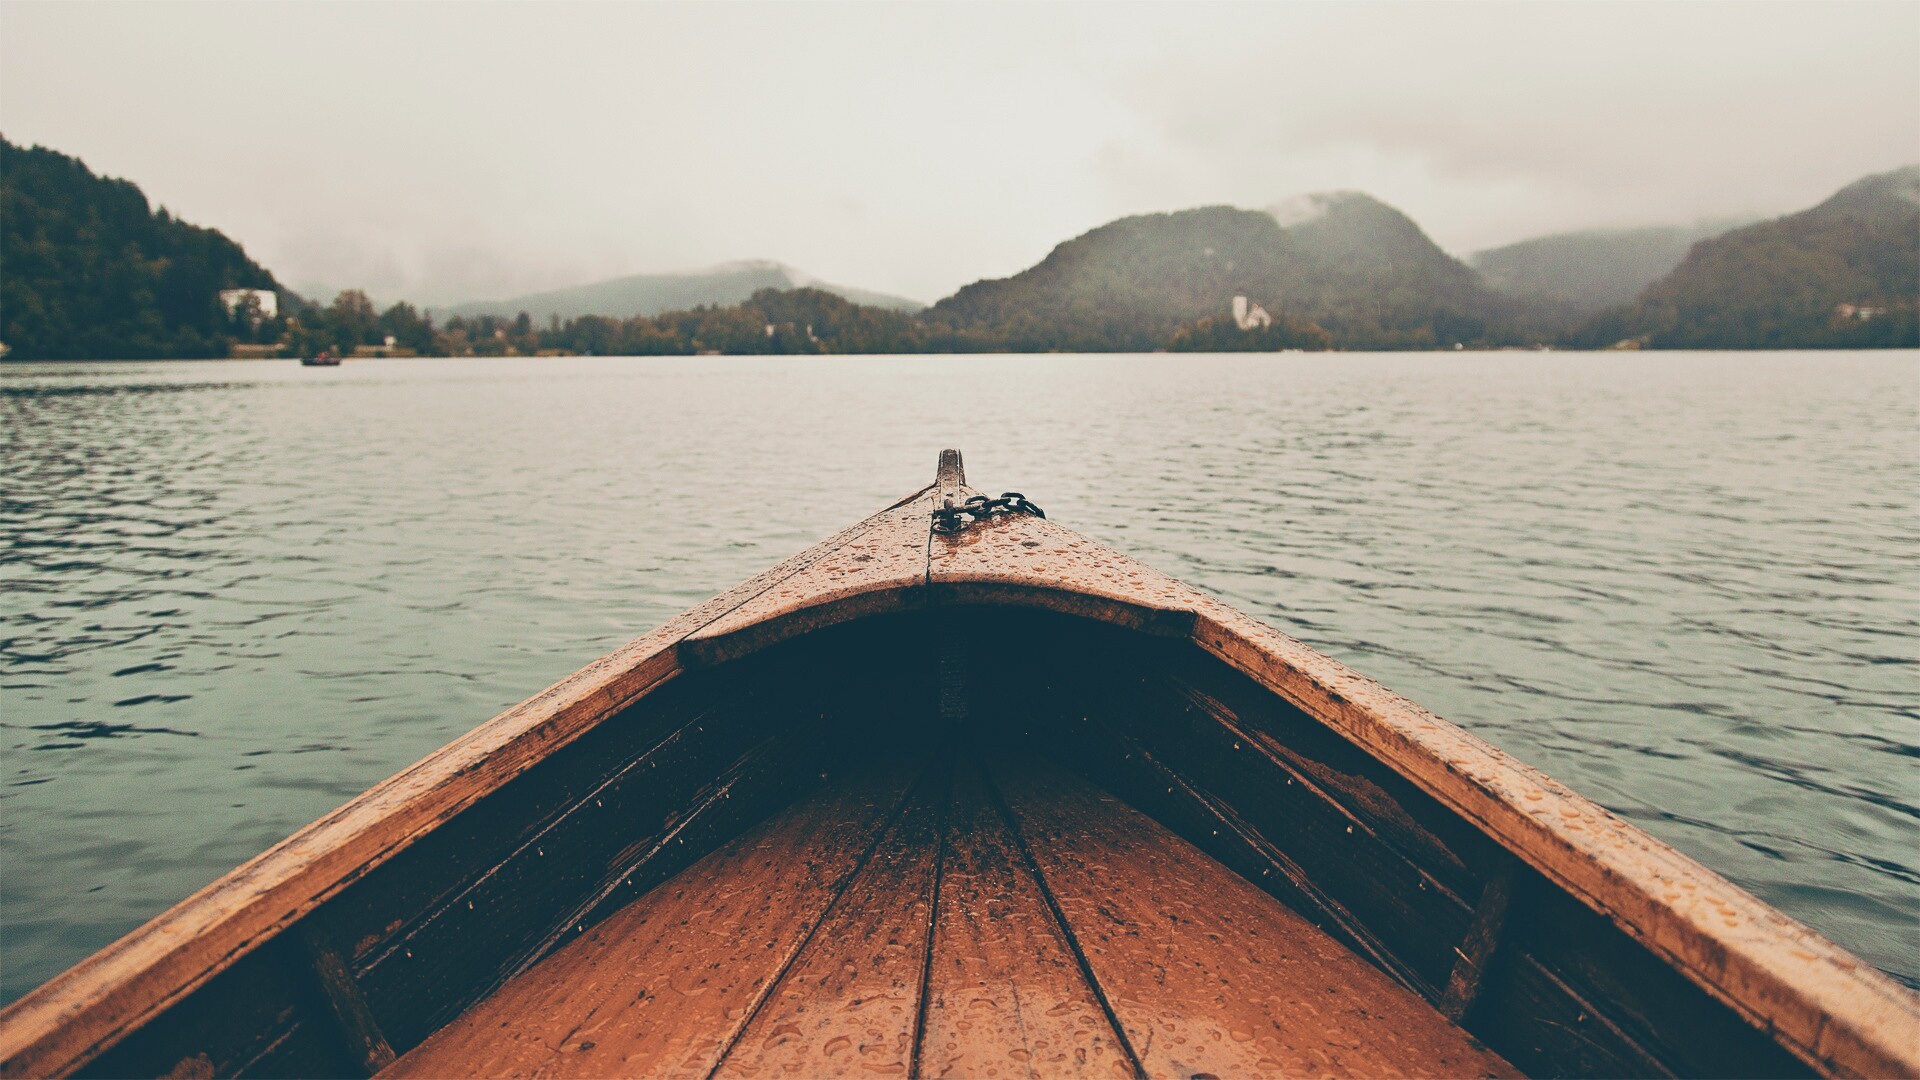 General 1920x1080 landscape lake boat filter water water drops depth of field Lake Bled Slovenia mist vehicle island